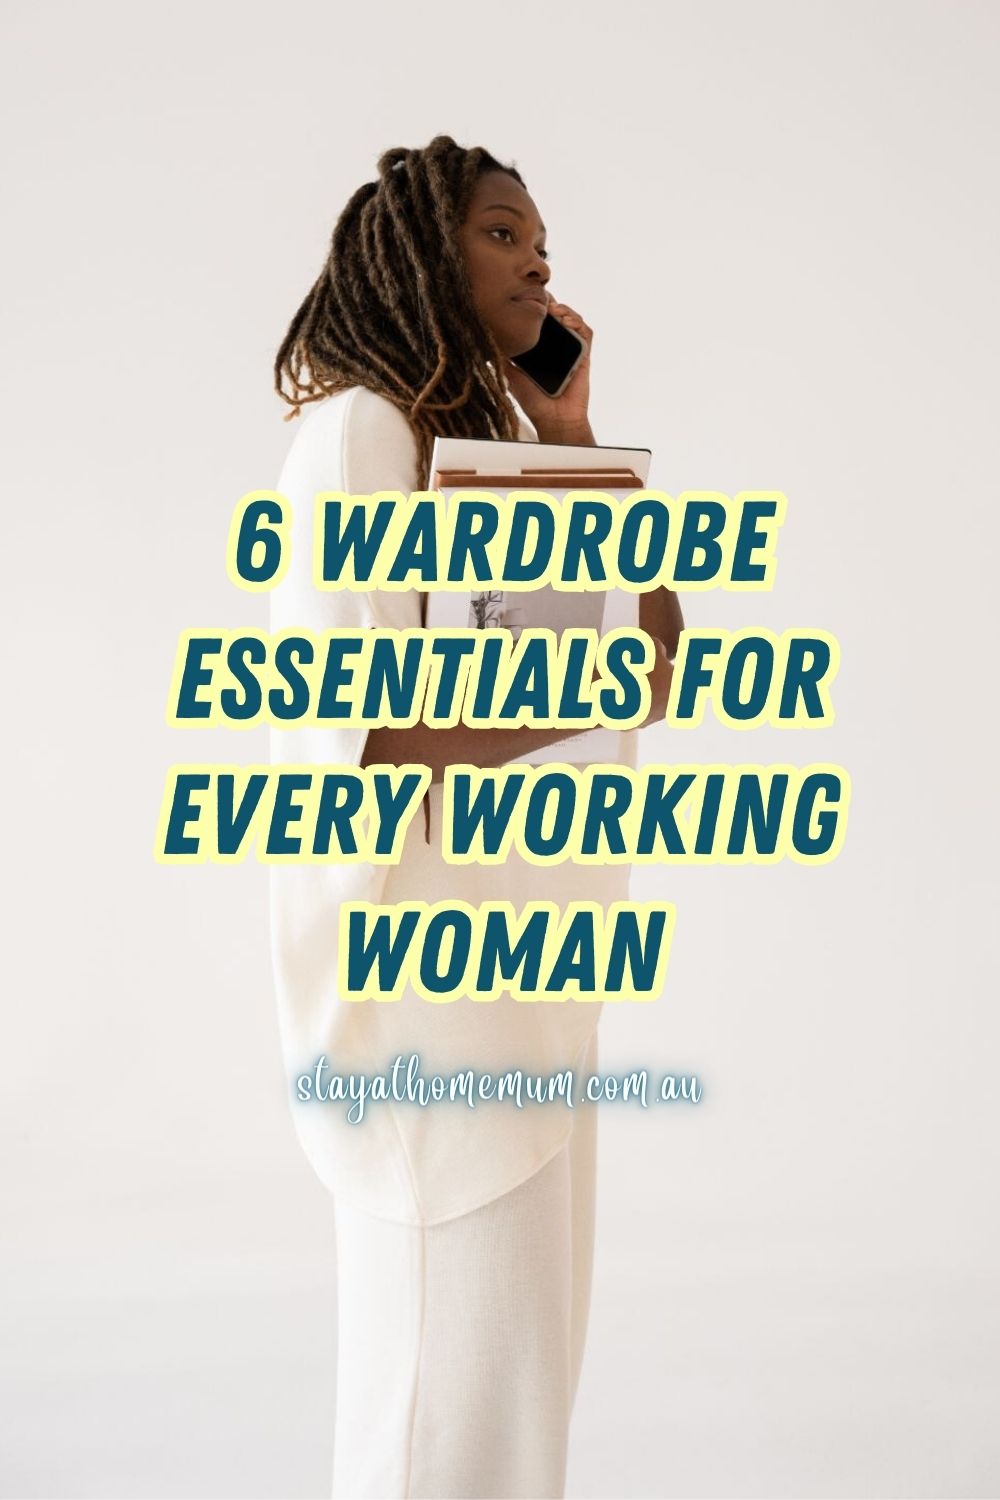 6 Wardrobe Essentials for Every Working Woman Pinnable